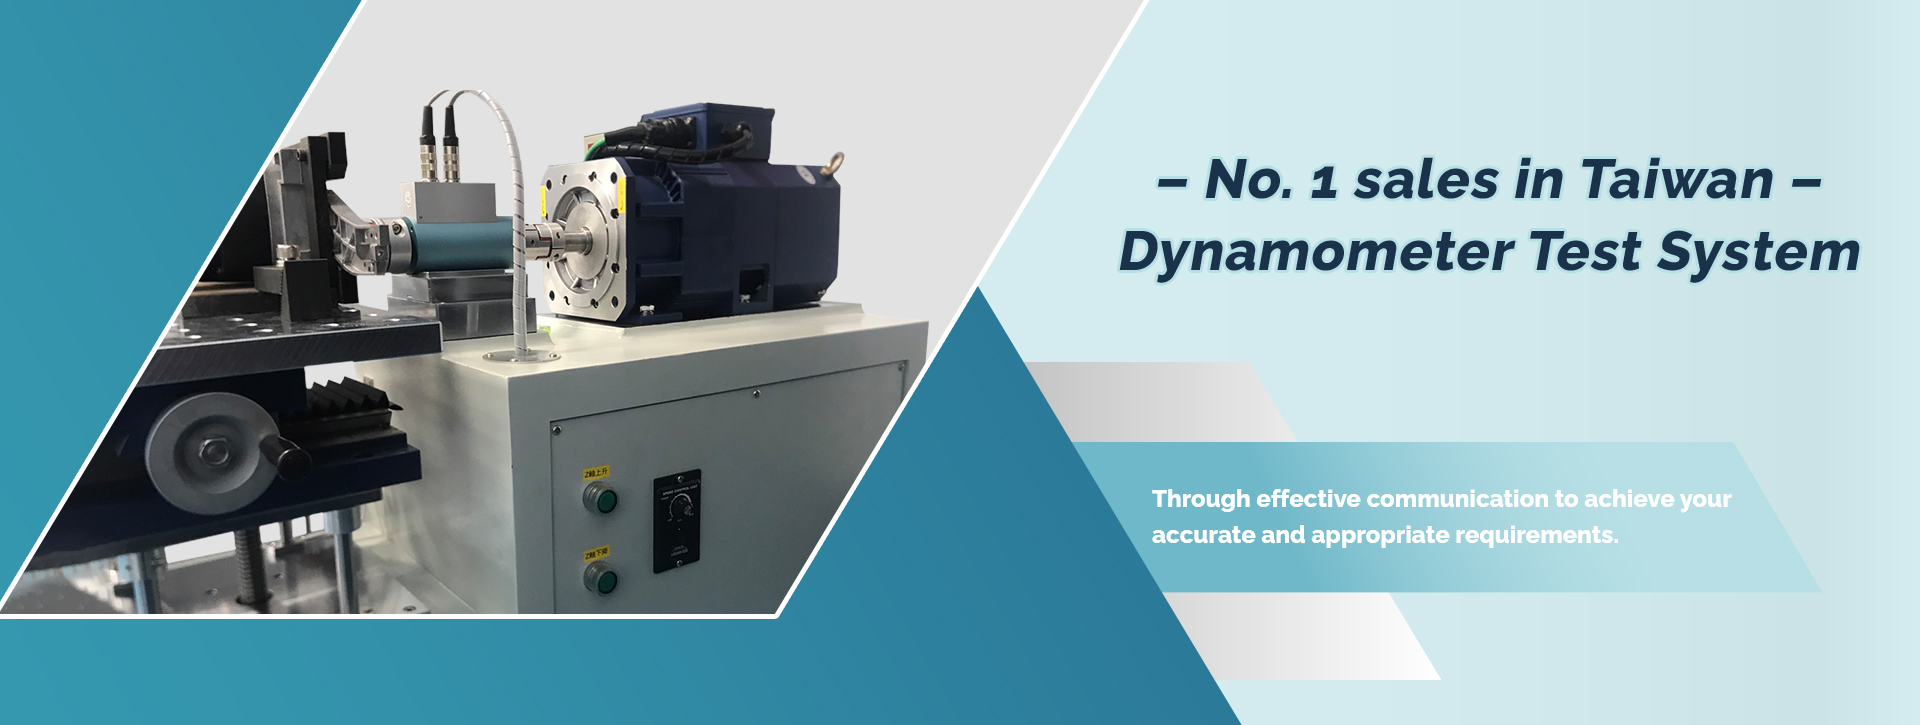 Electric Dynamometer Test System & Equipment - Join-Precision Tech